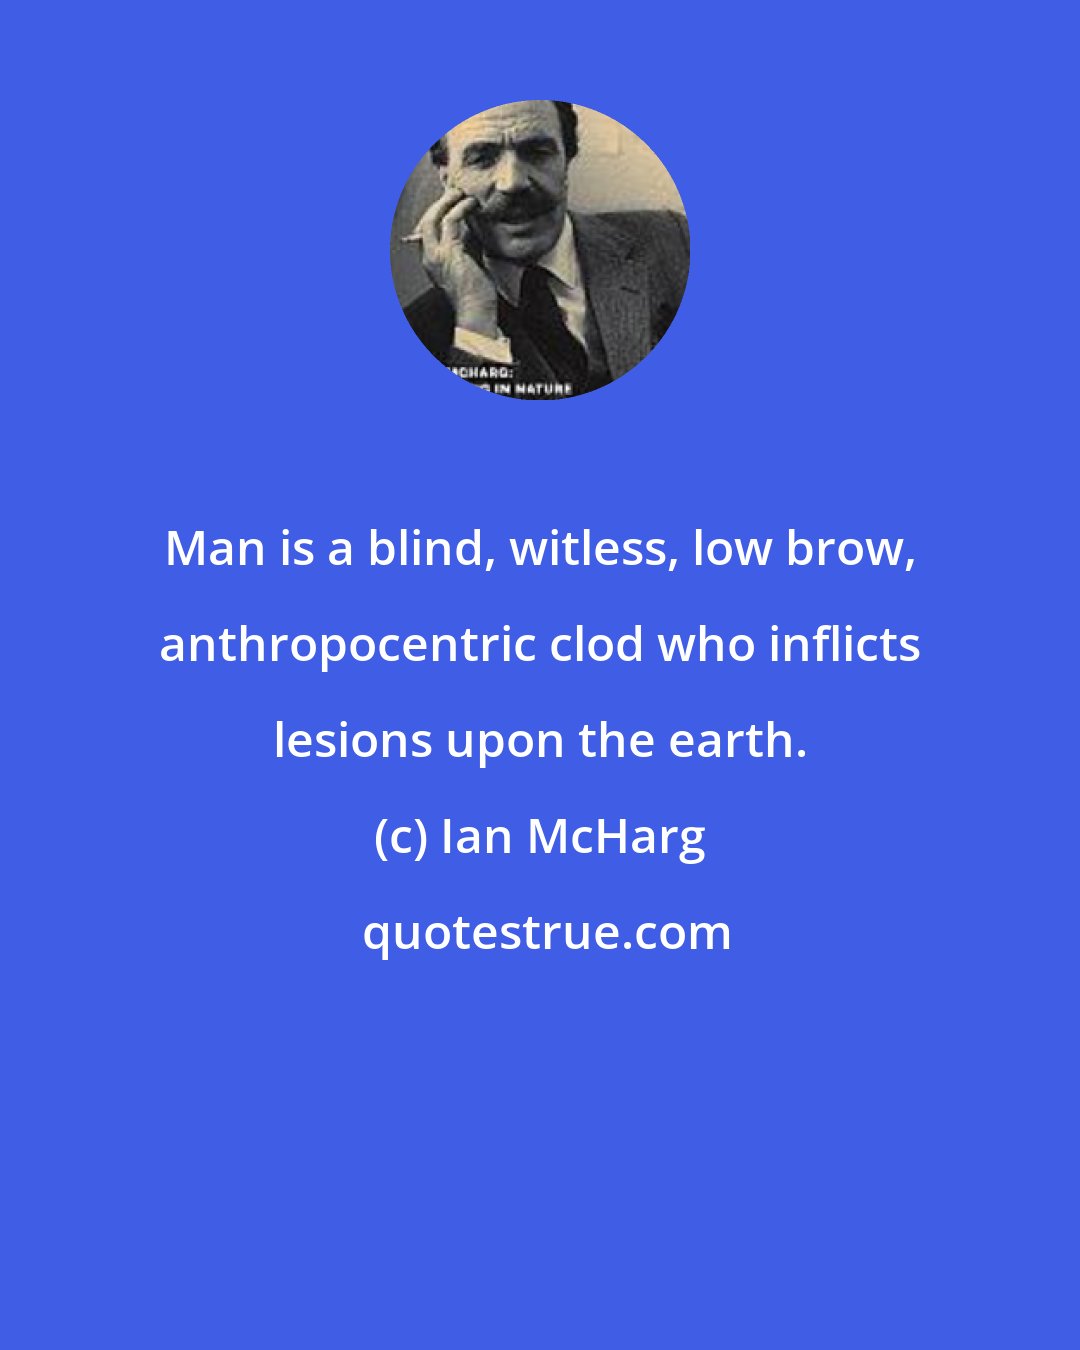 Ian McHarg: Man is a blind, witless, low brow, anthropocentric clod who inflicts lesions upon the earth.